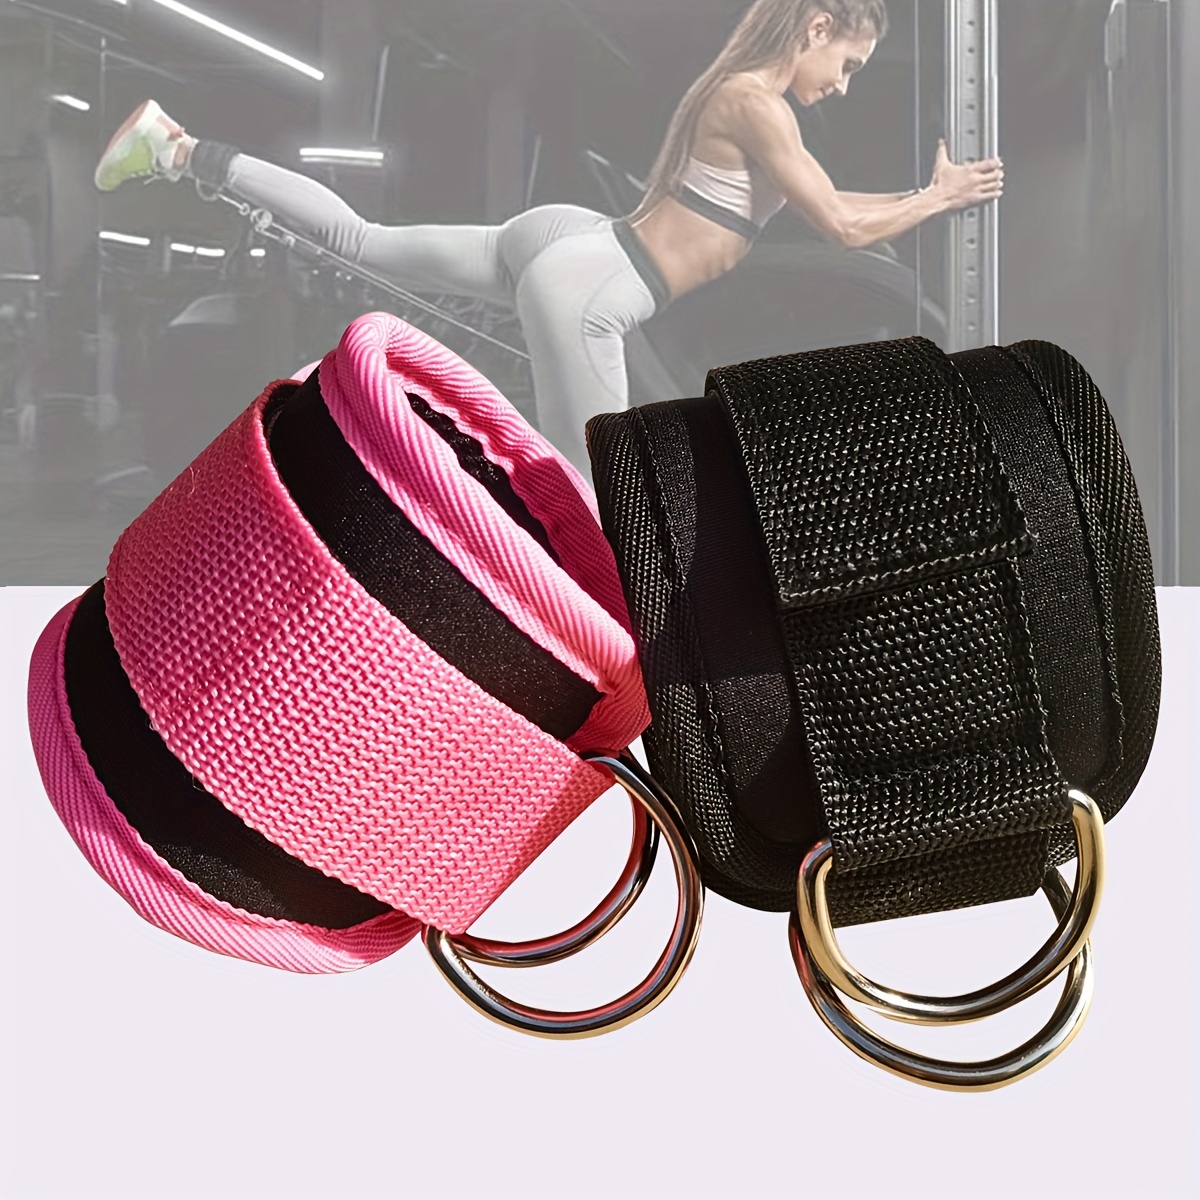 Adjustable Wrist Ankle Cuffs D Ring Pulley Lifting Straps Gym